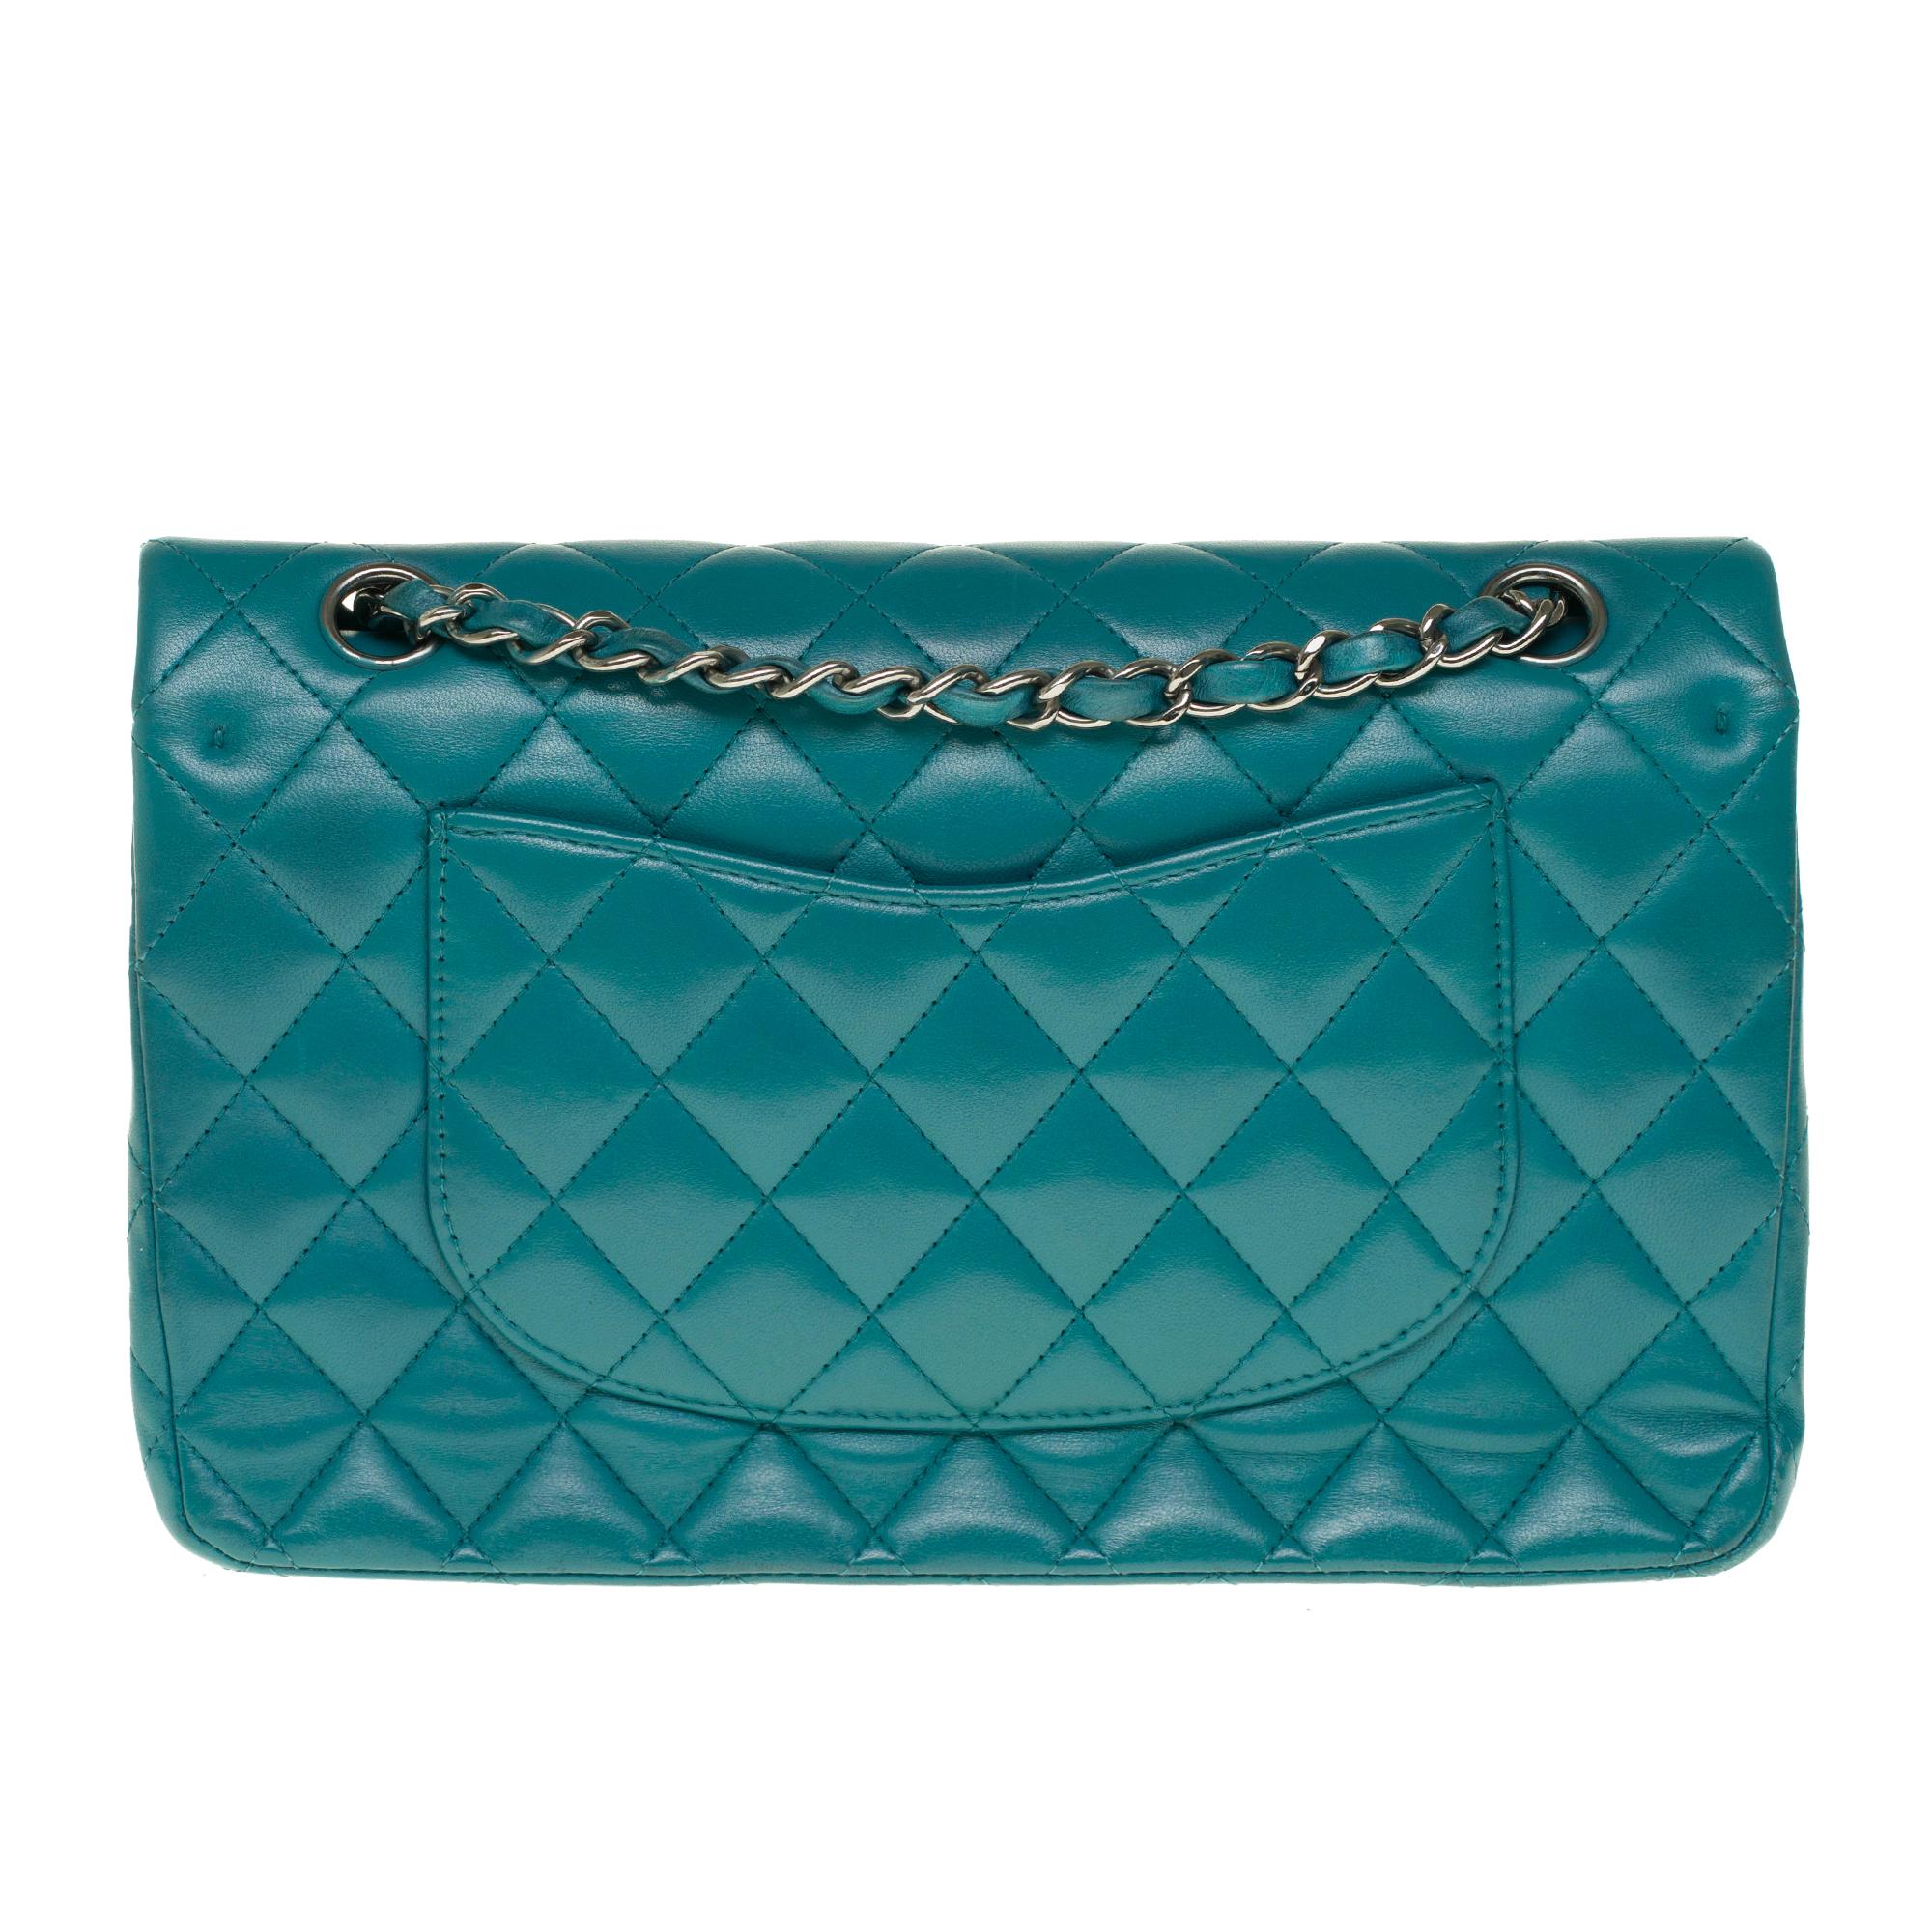 Beautiful Chanel 2.55 handbag in green nappa leather, chain handle intertwined with green leather allowing a hand or shoulder or shoulder strap.

Silver metal flap closure.
A patch pocket on the back of the bag.
Lining in green leather, a double